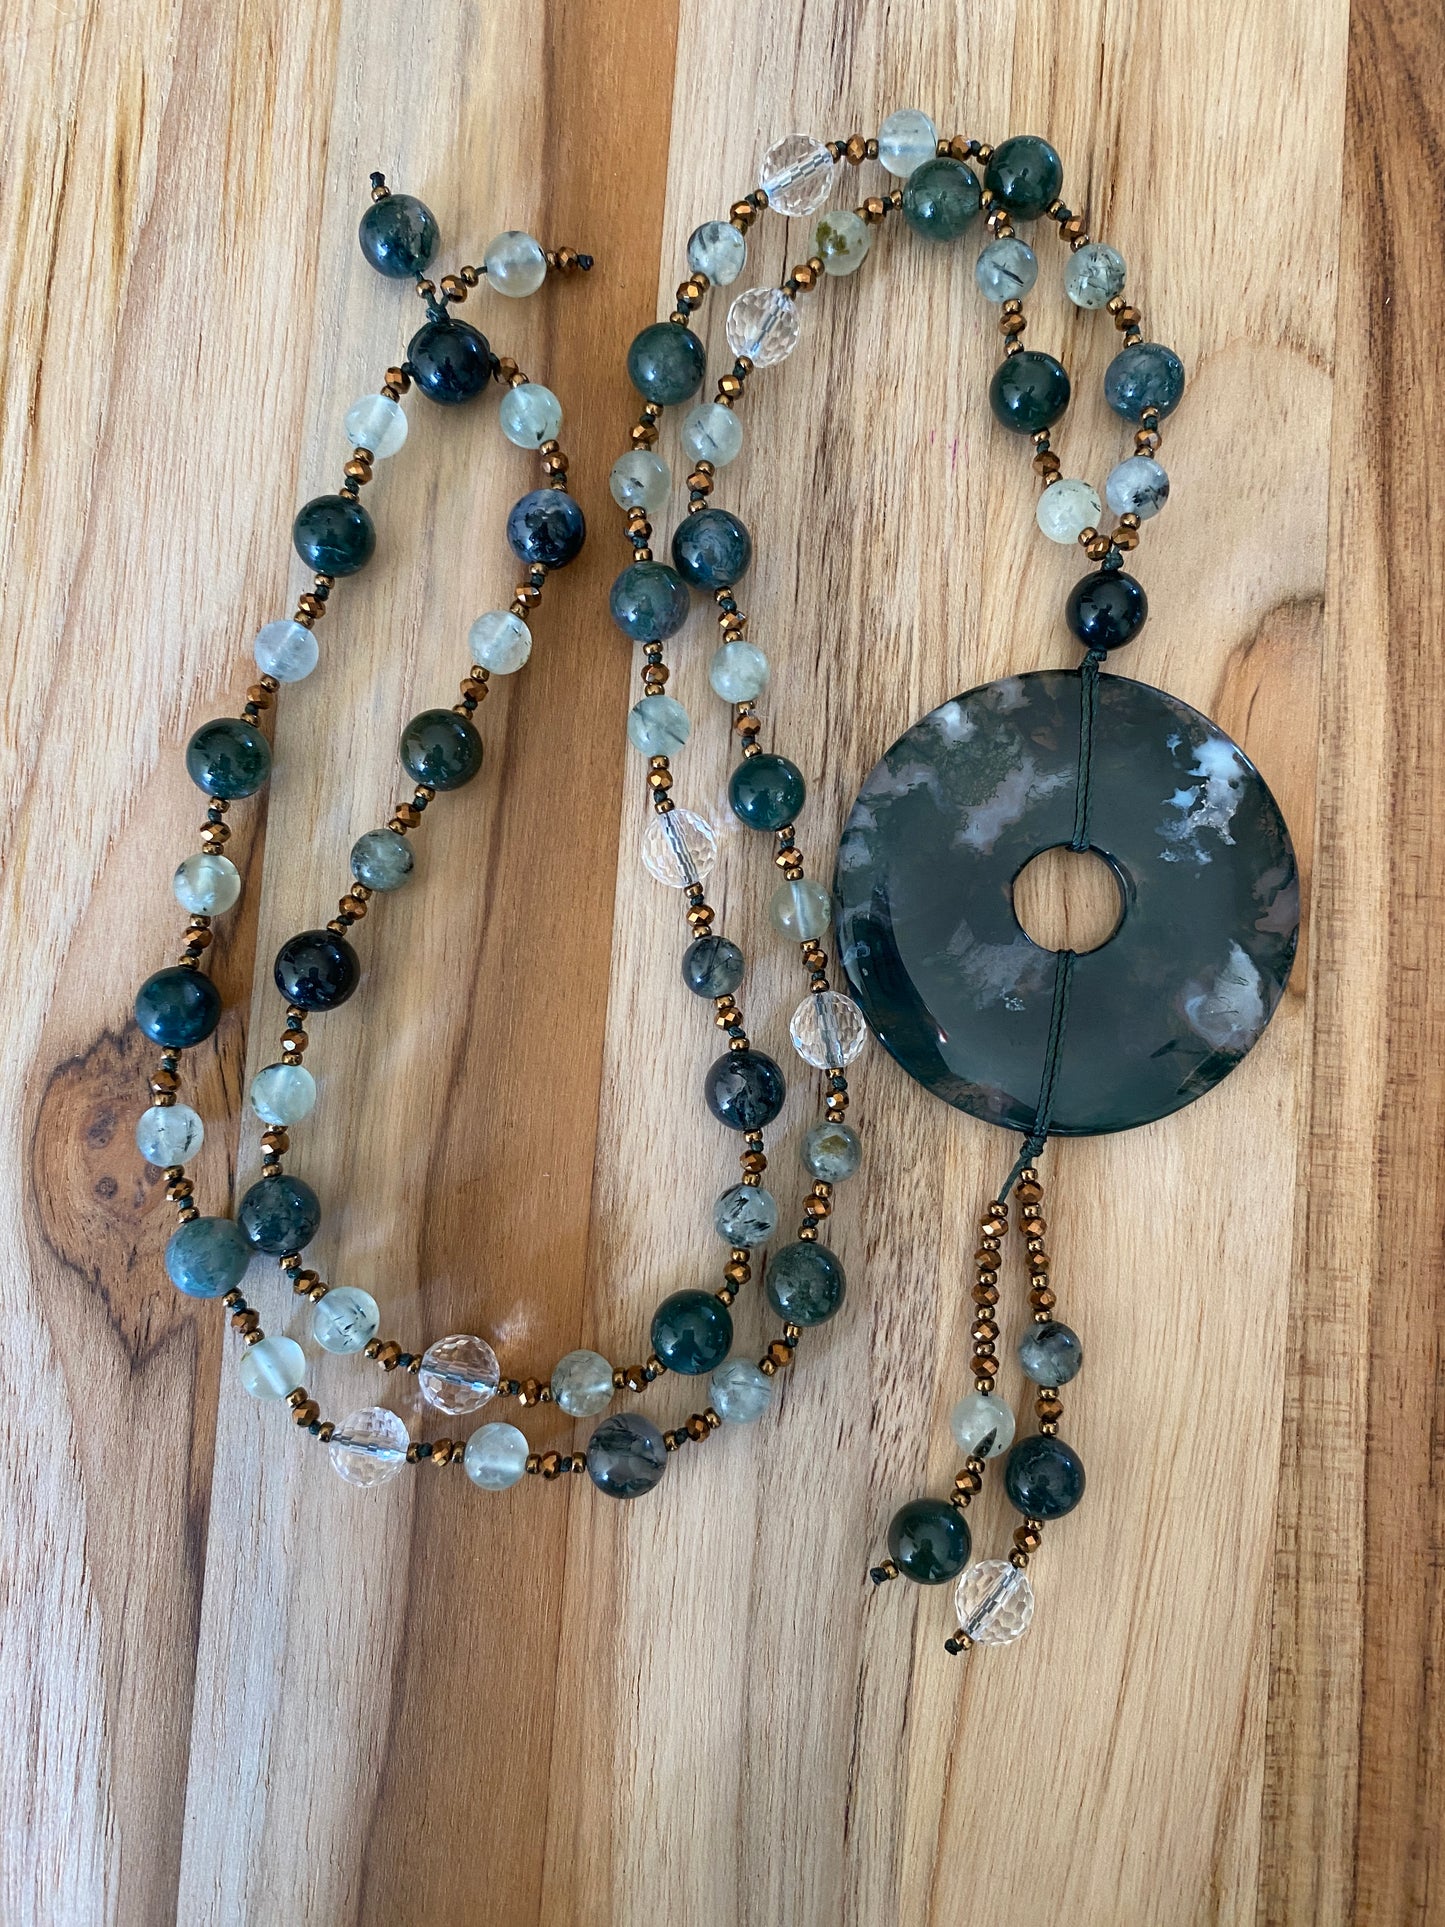 Green Moss Agate Donut Pendant Necklace with Moss Agate Prehnite and Clear Quartz Beads